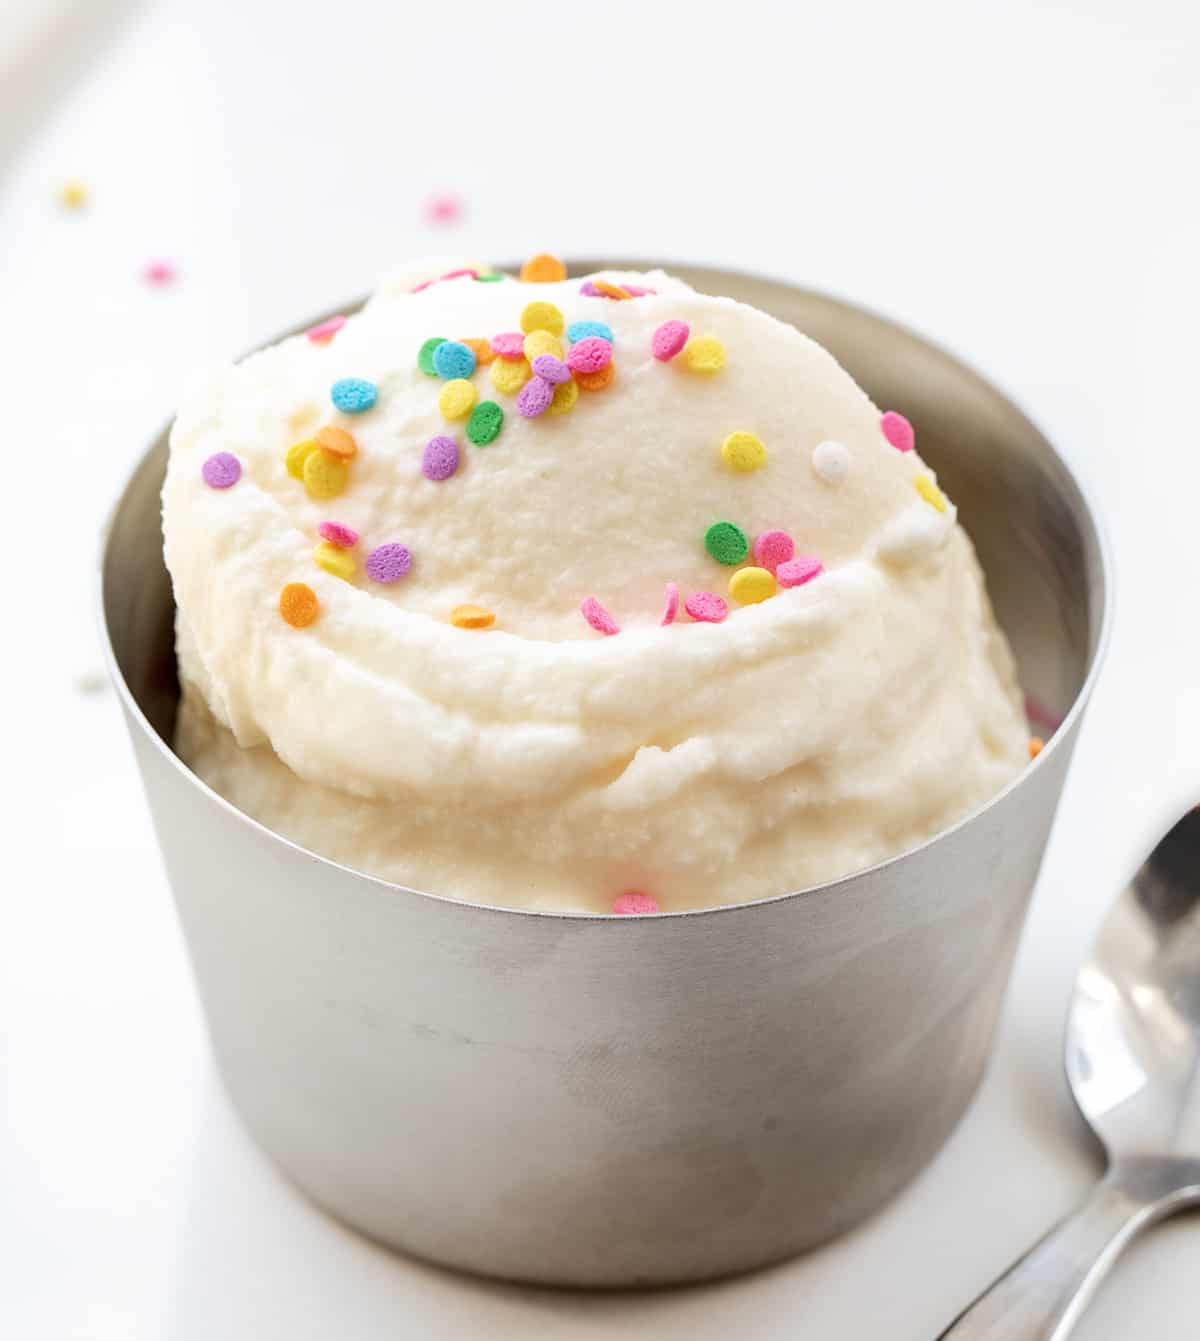 Metal Bowl with Scoops of Soft Serve Ice Cream in It with Sprinkles and a Spoon on a White Counter.